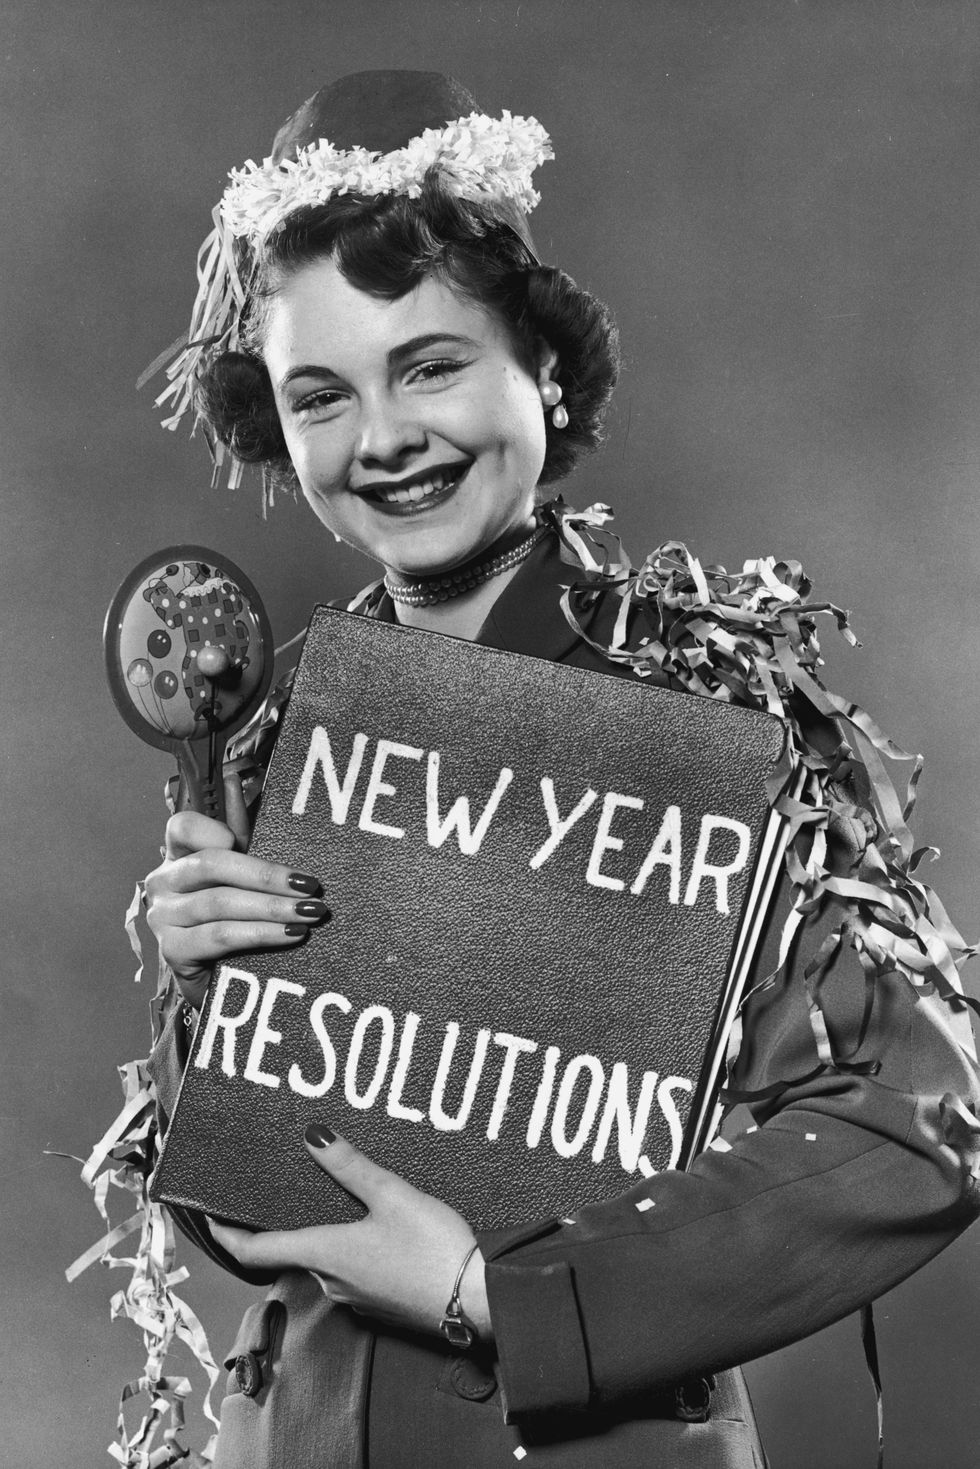 10 New Year's Eve Traditions - Venngage